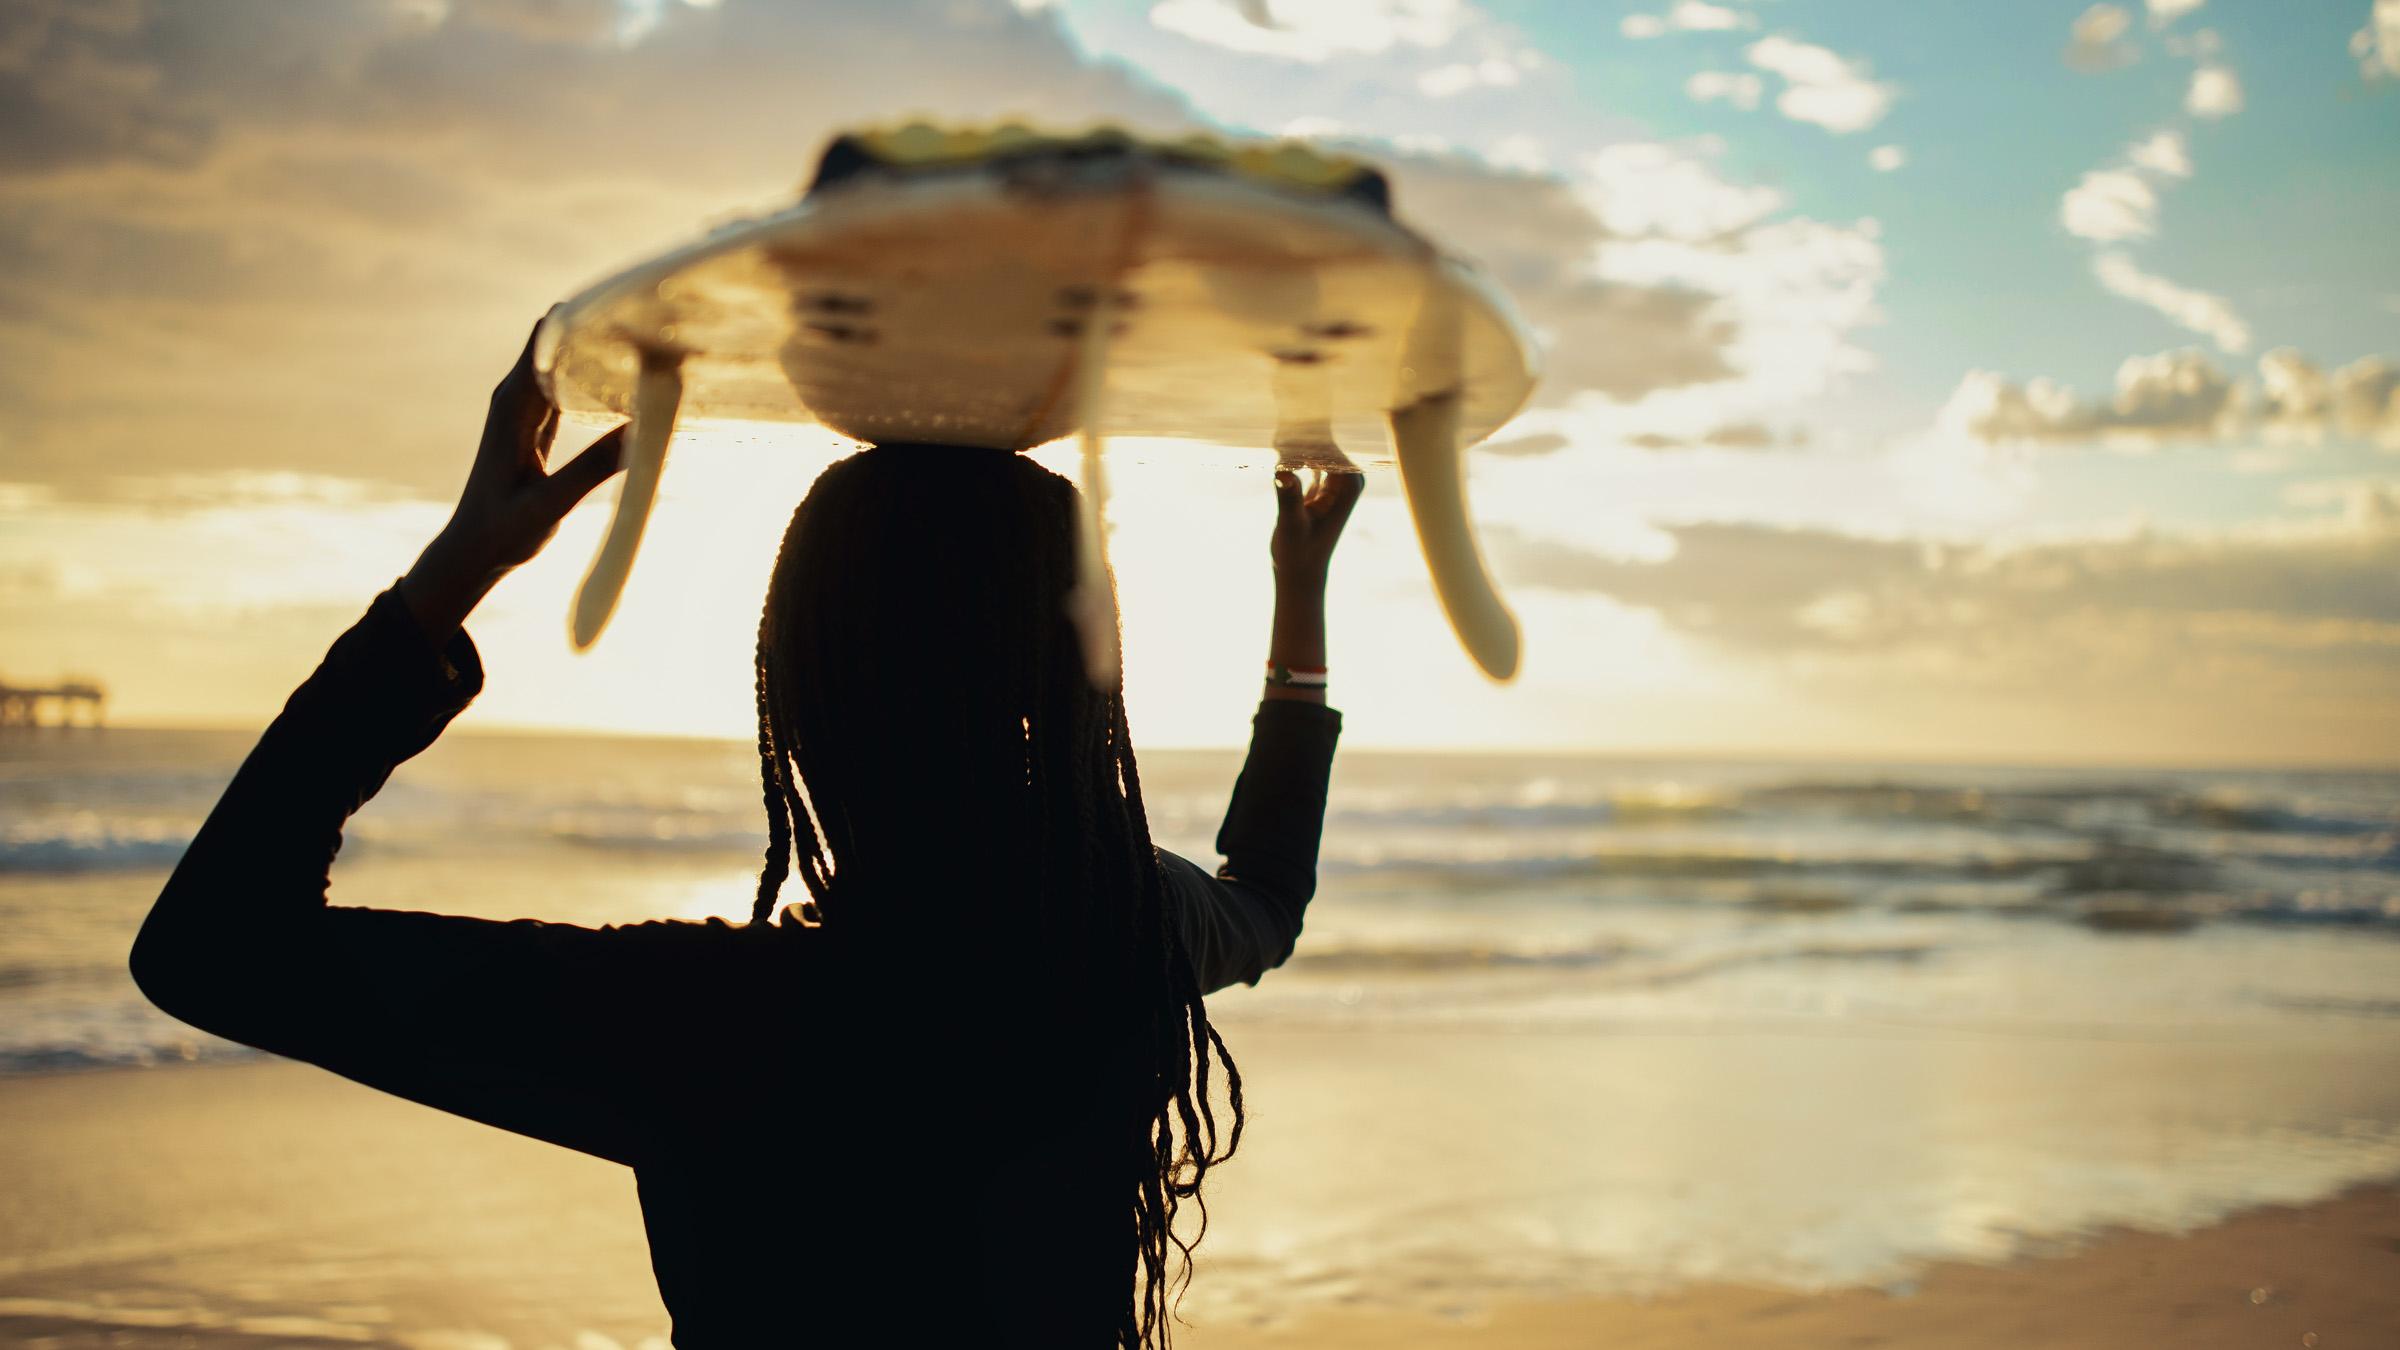 A young woman with braids and a surfboard looks out to the waves at the beach.